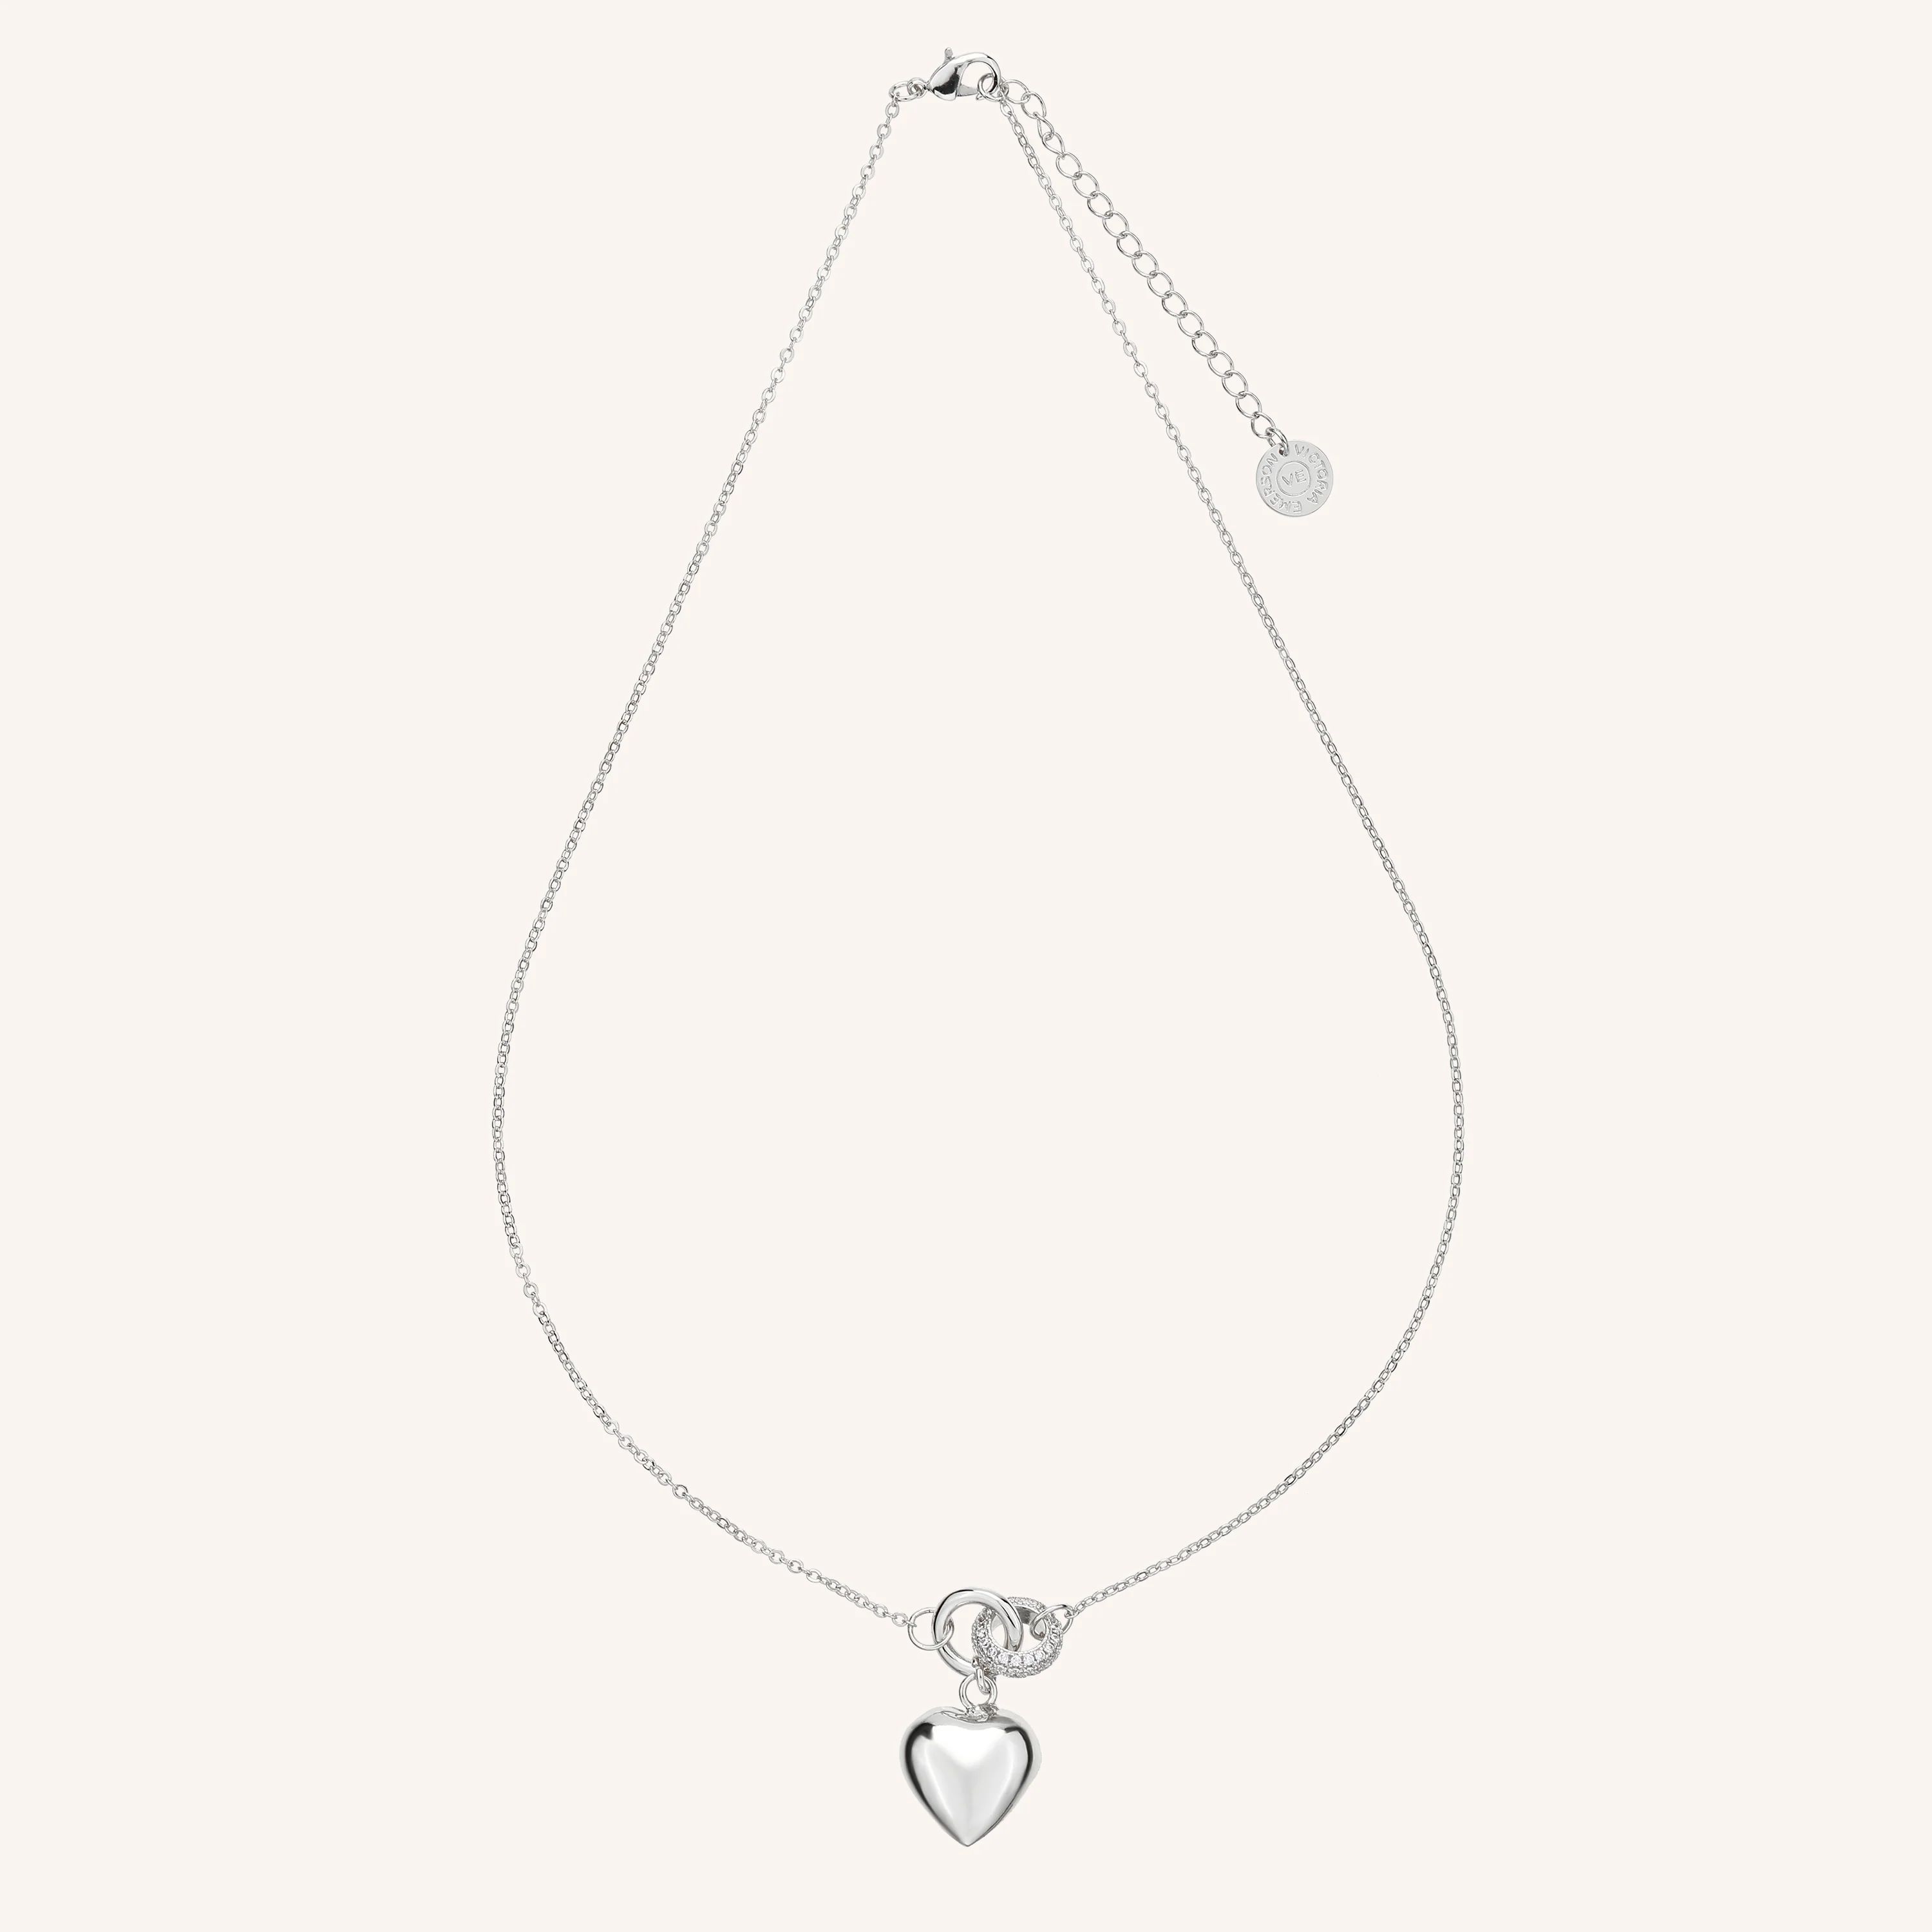 Speaking of Romance Necklace - Silver | Victoria Emerson